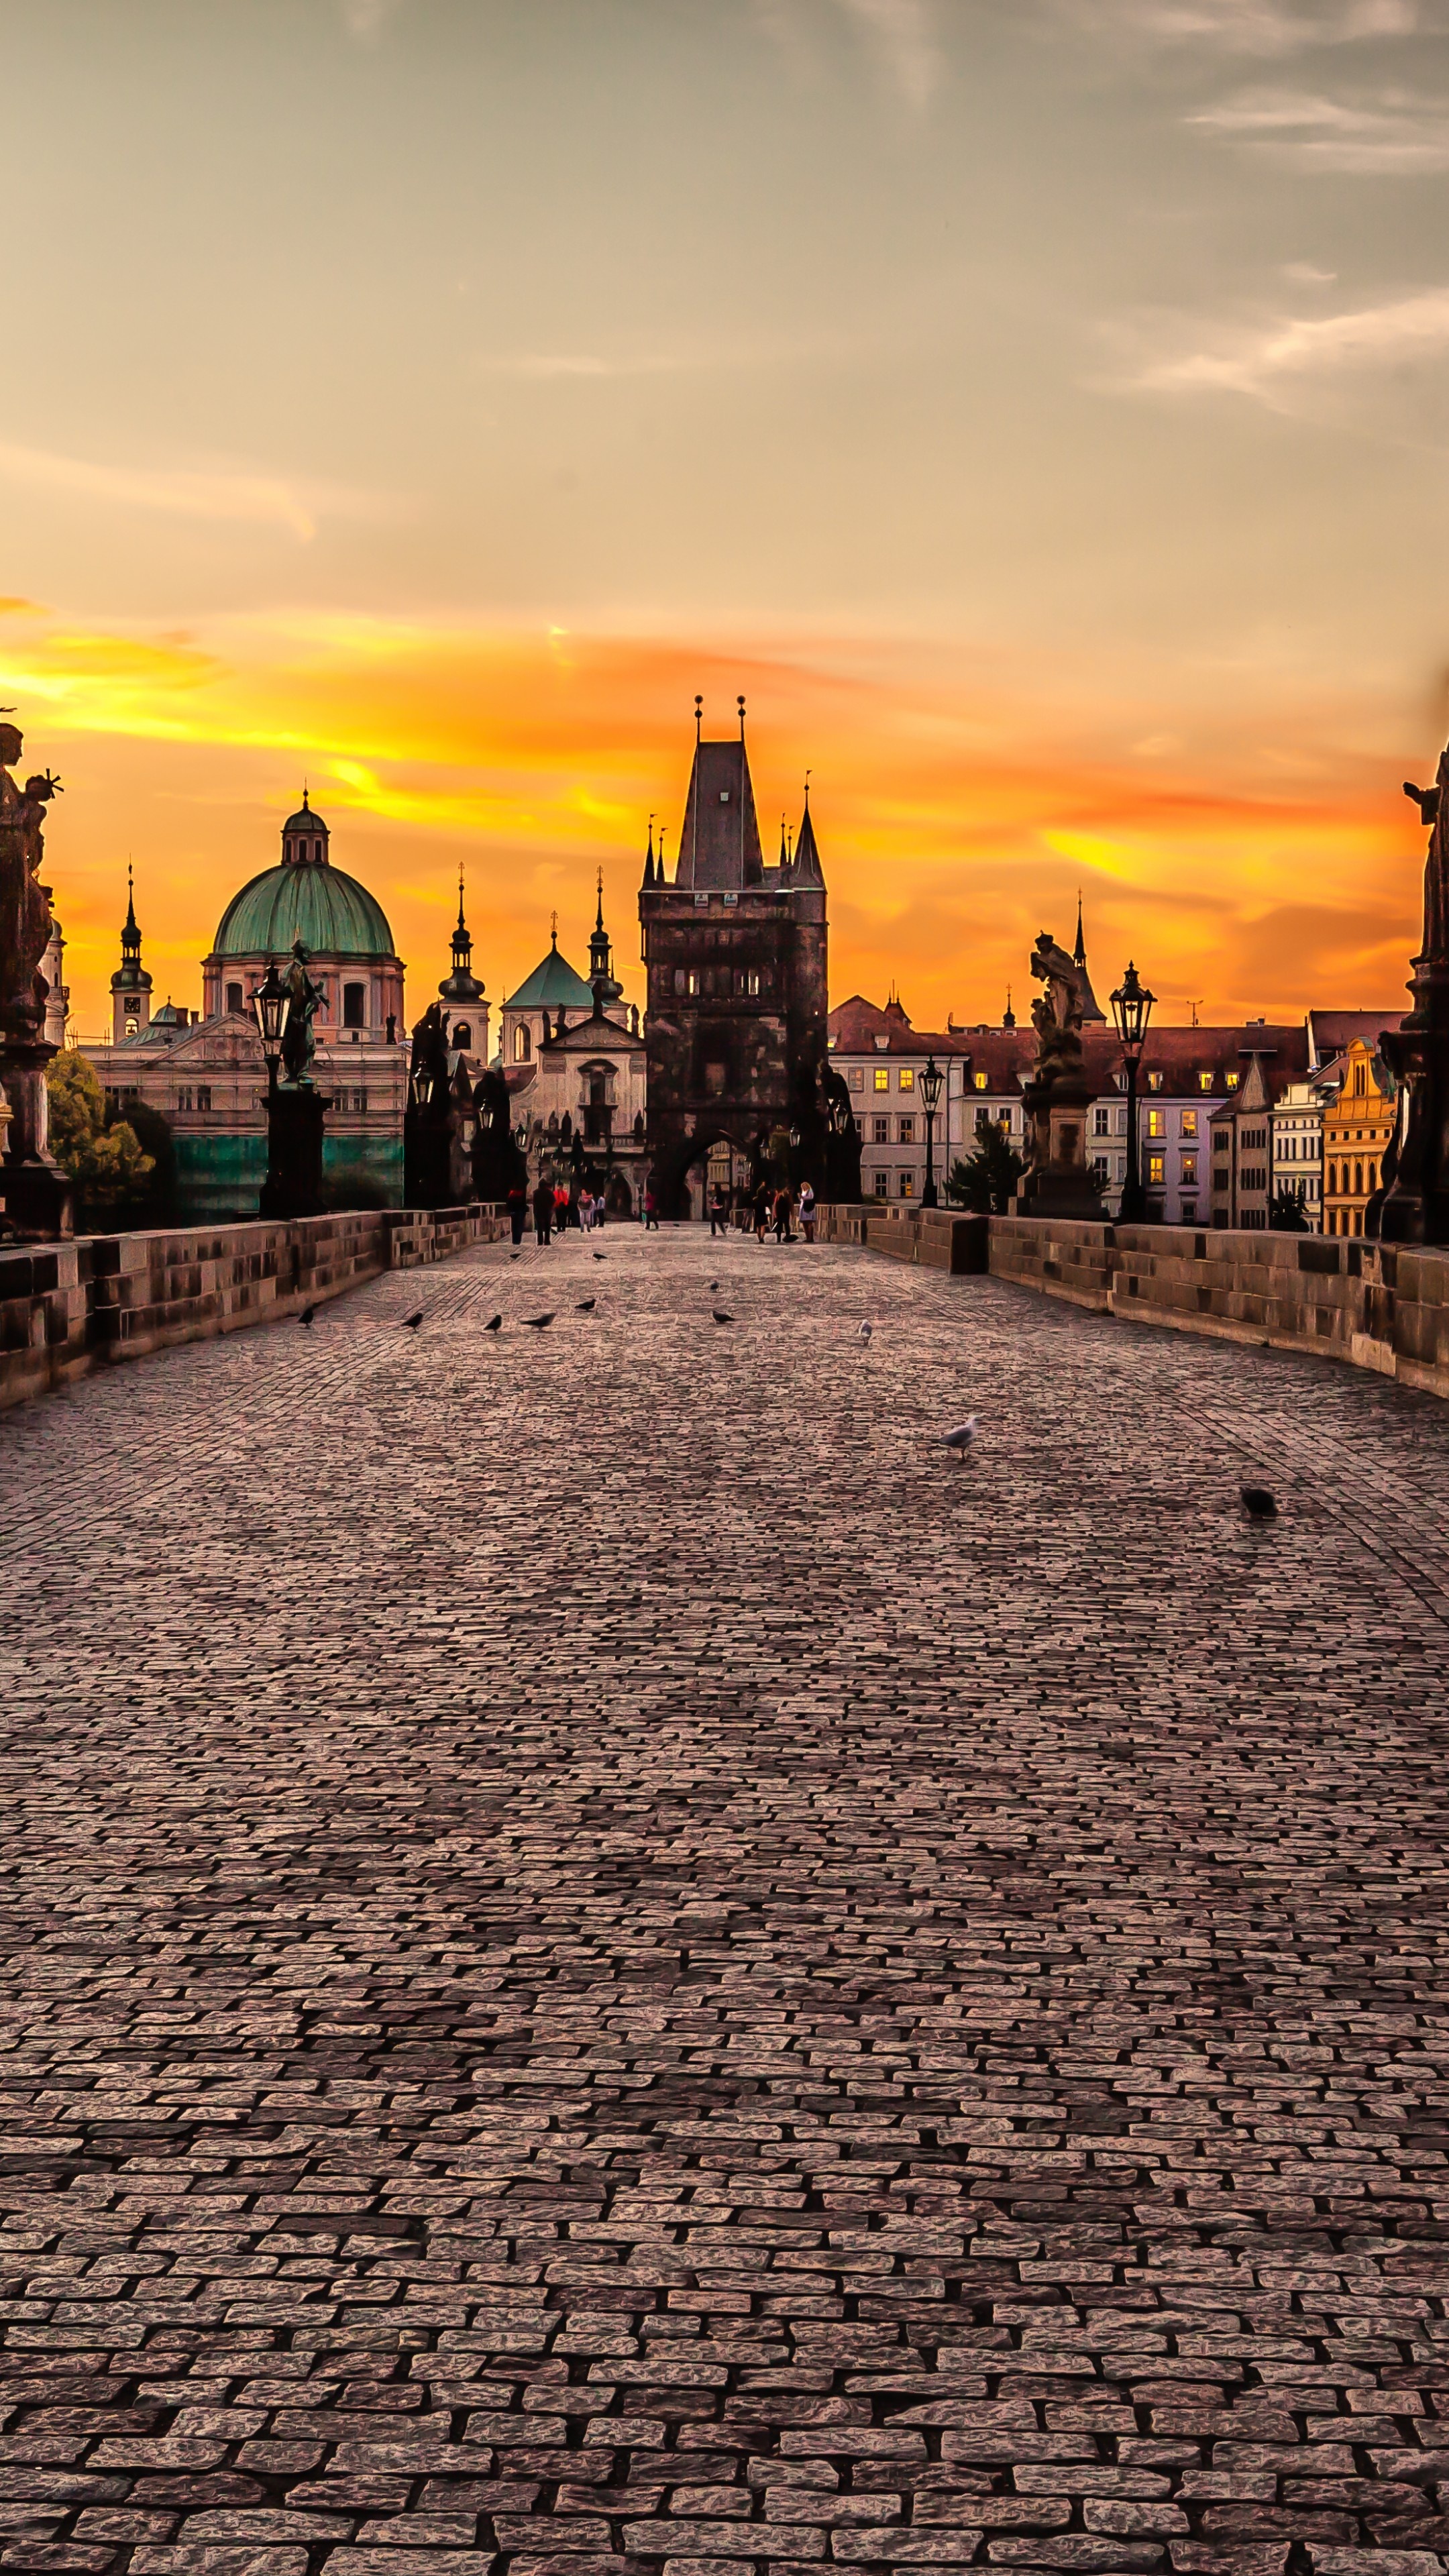 Prague: Czech Republic, Was listed as the fifth most visited European city in 2017. 2160x3840 4K Wallpaper.